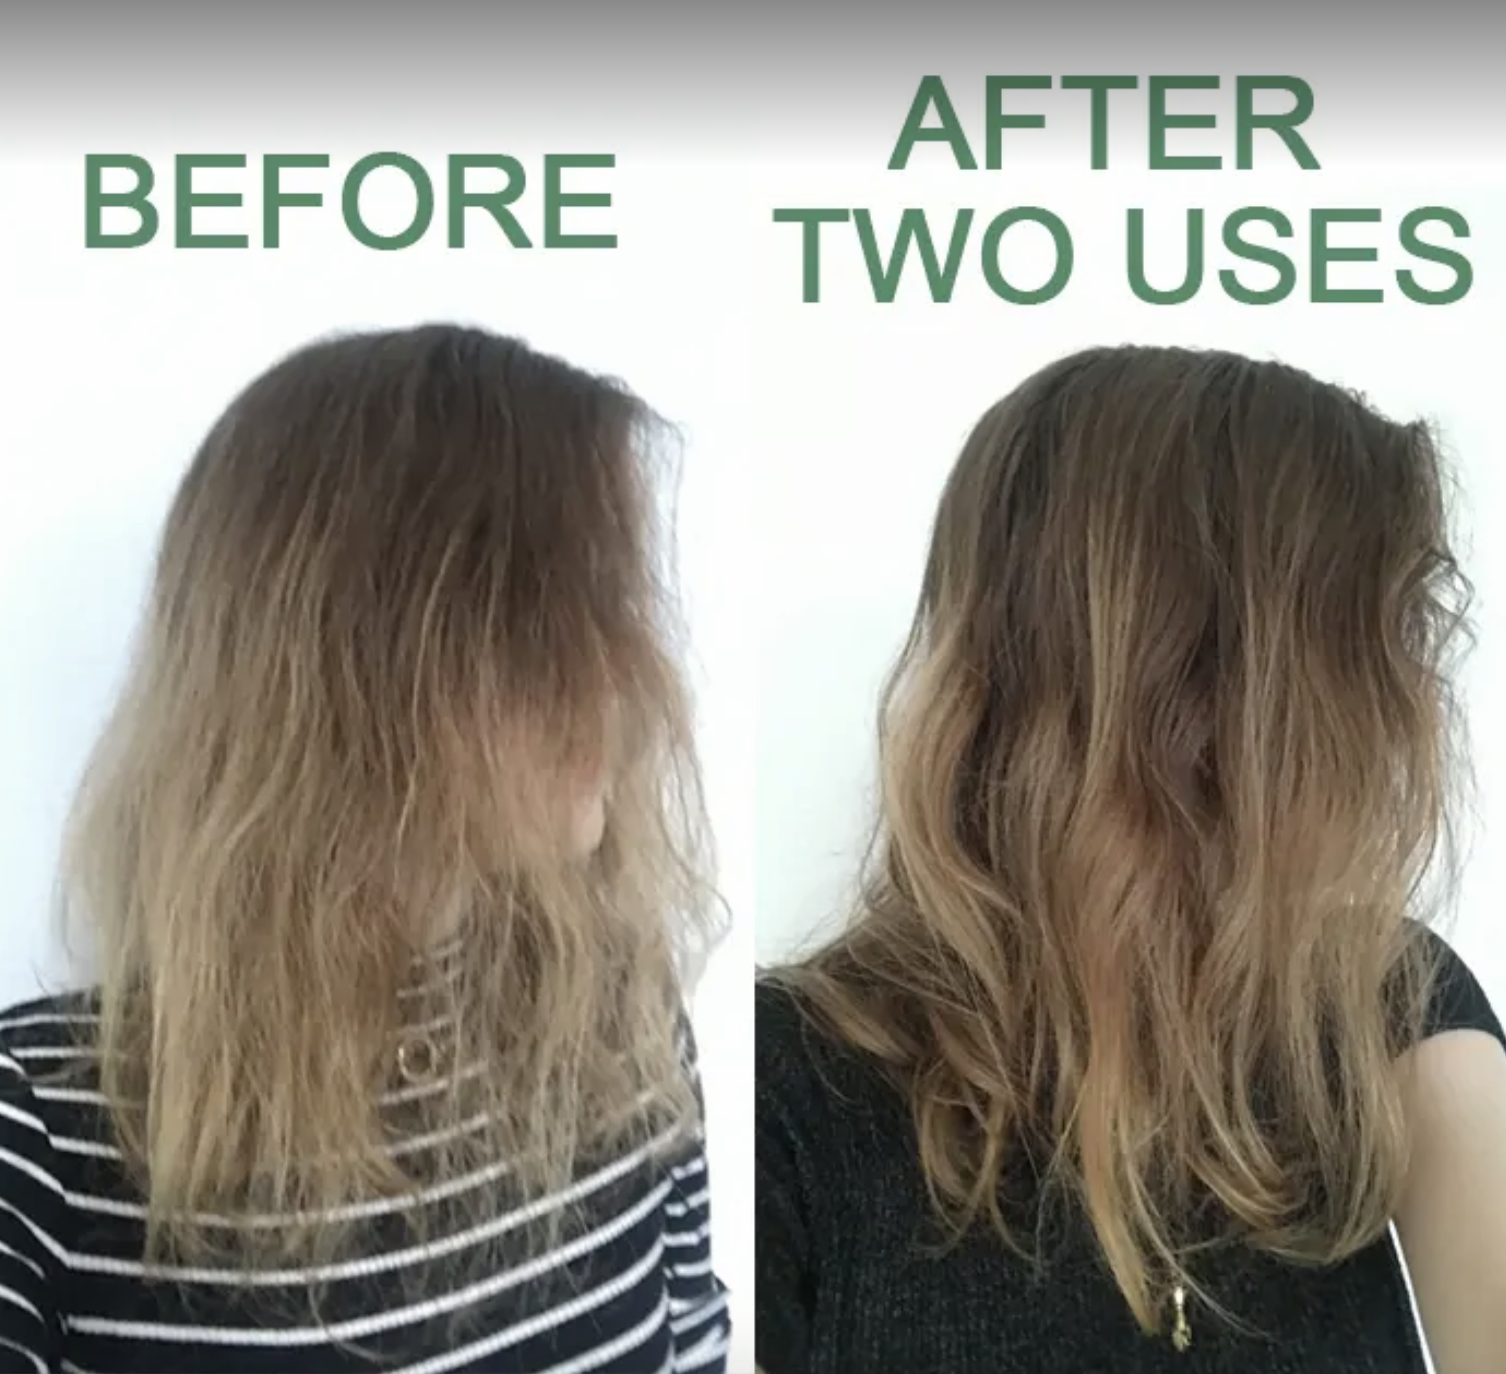 before and after of BuzzFeed editor&#x27;s hair looking dry, then moisturized and silky after product use